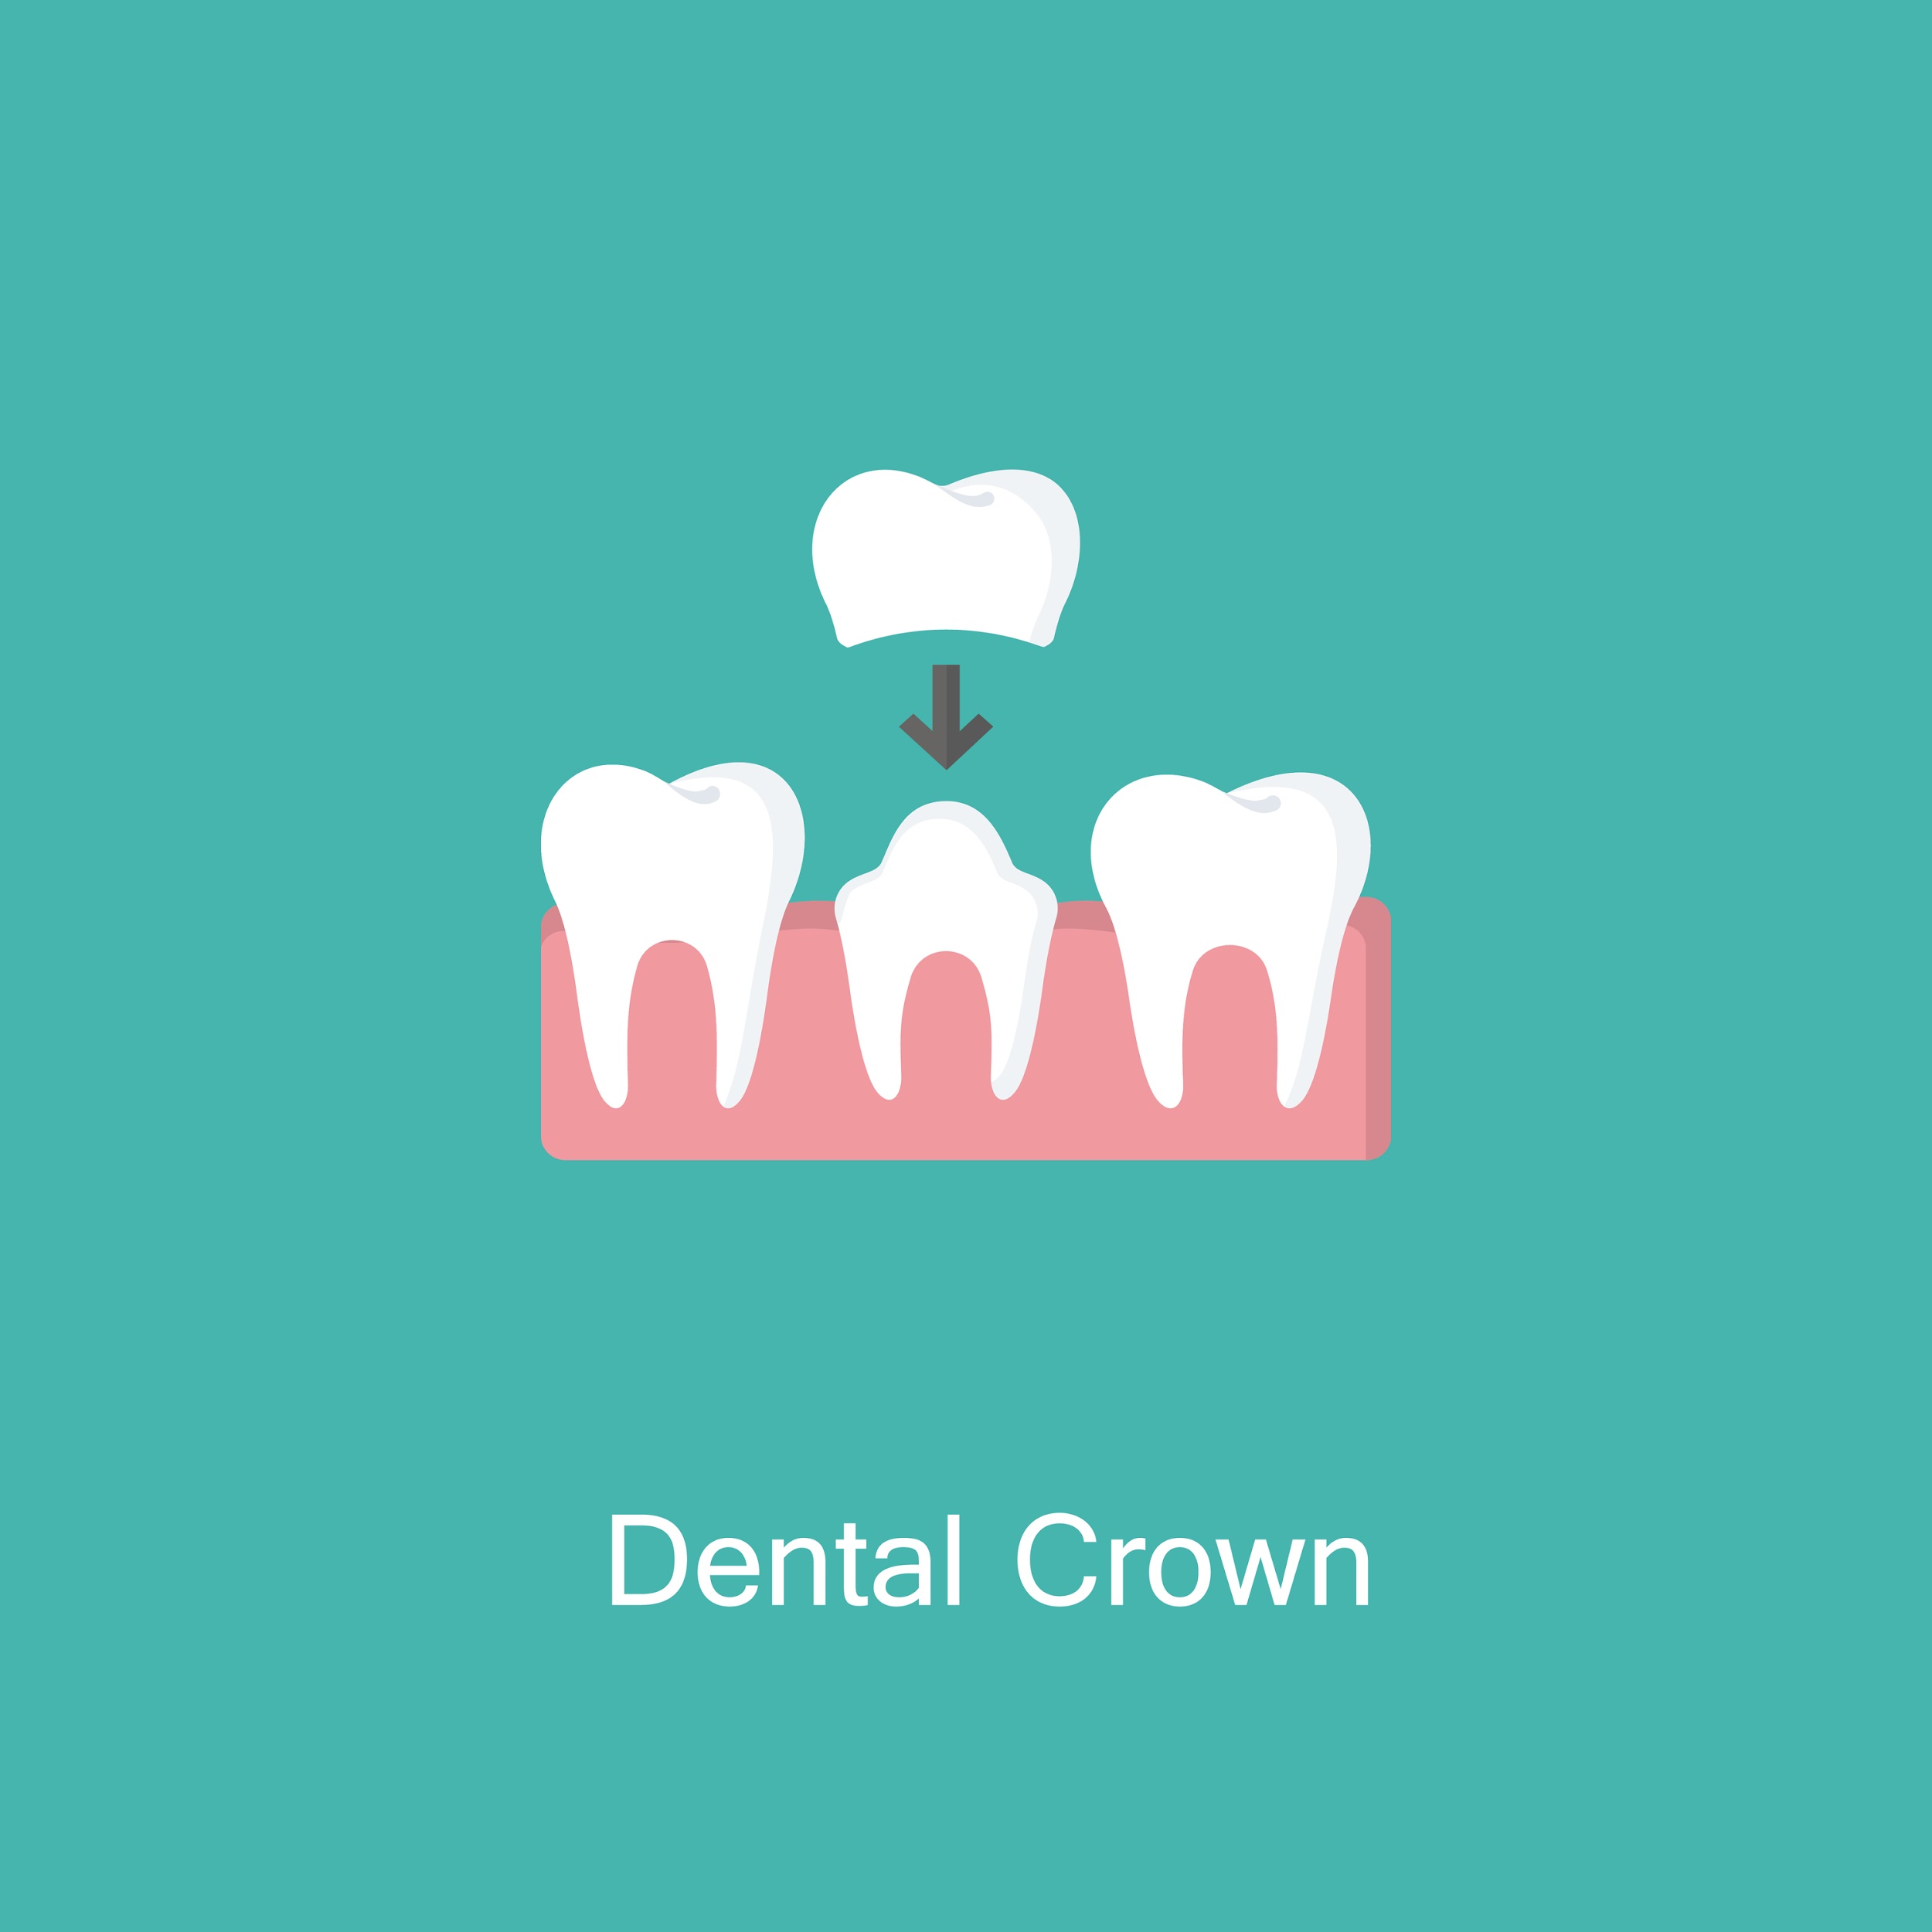 Illustration of dental crown being placed on a damaged tooth